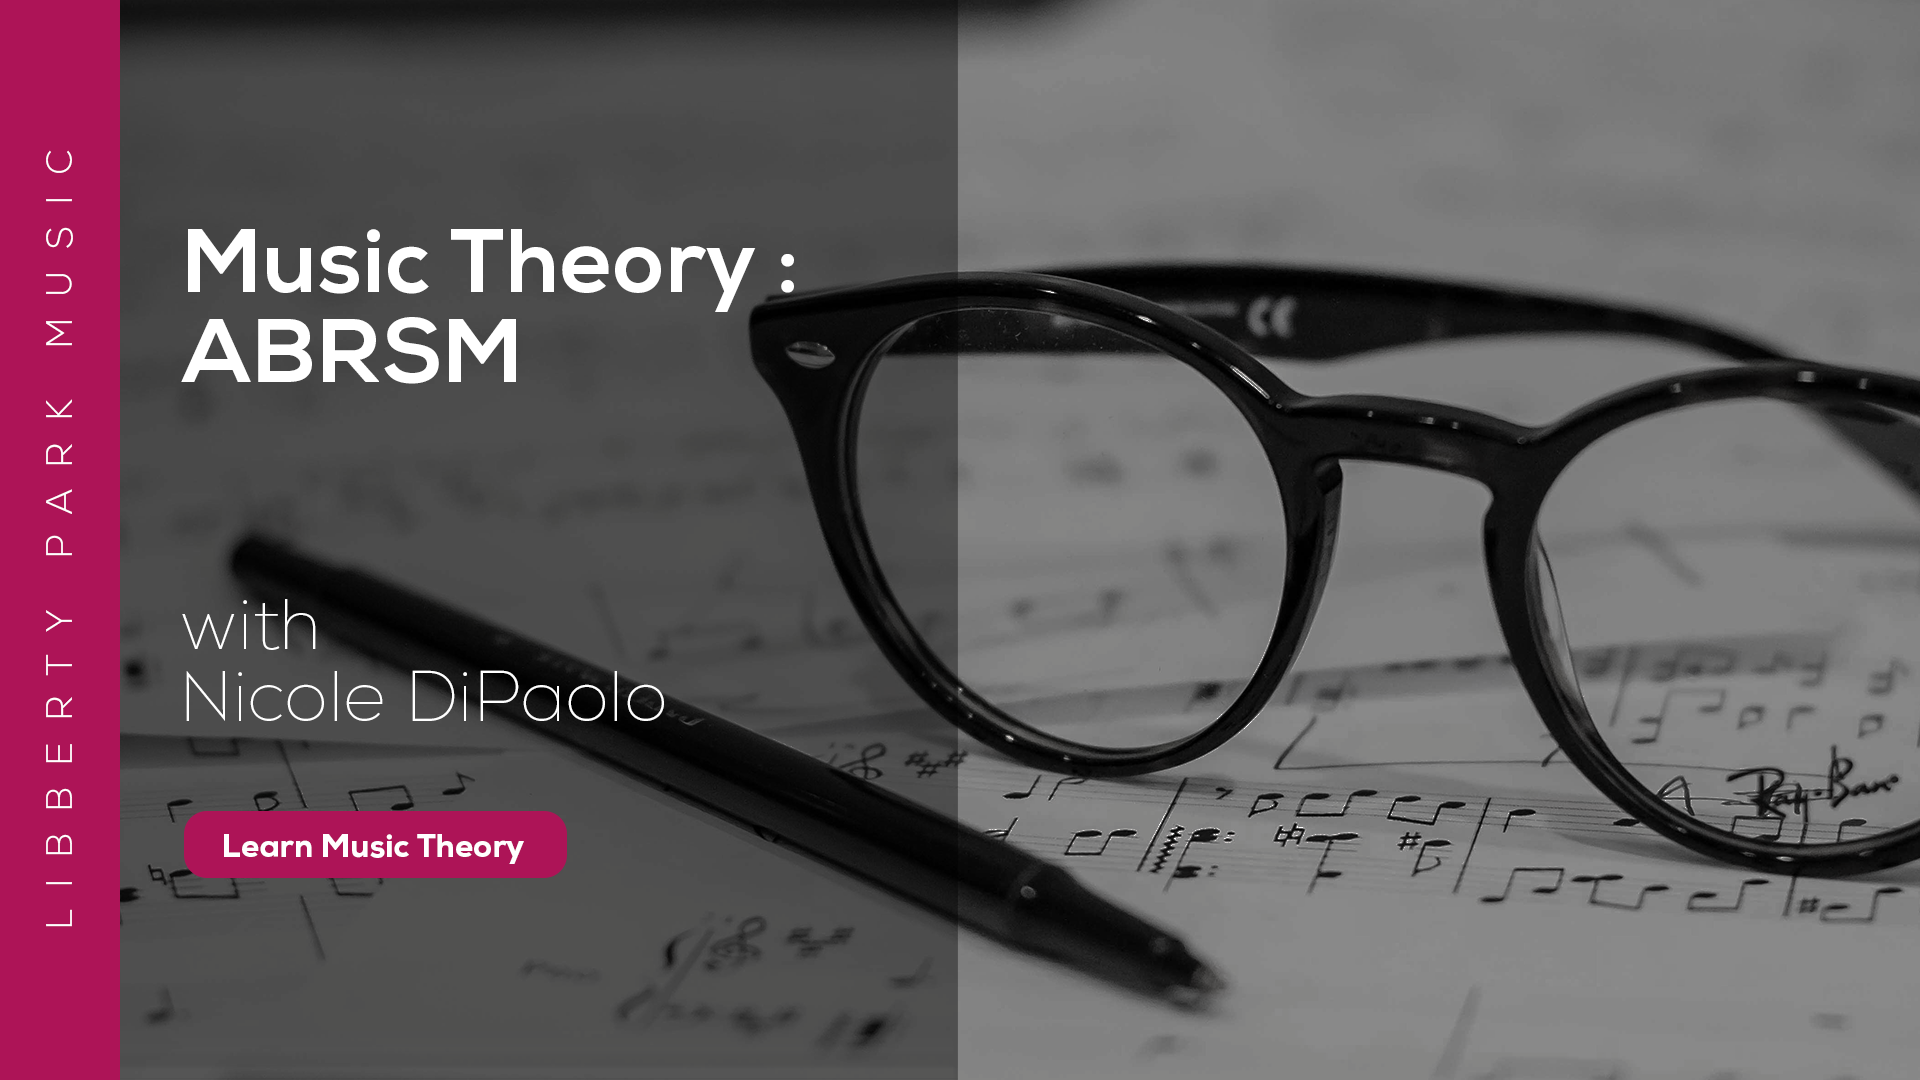 Online Music Theory Course on ABRSM THEORY